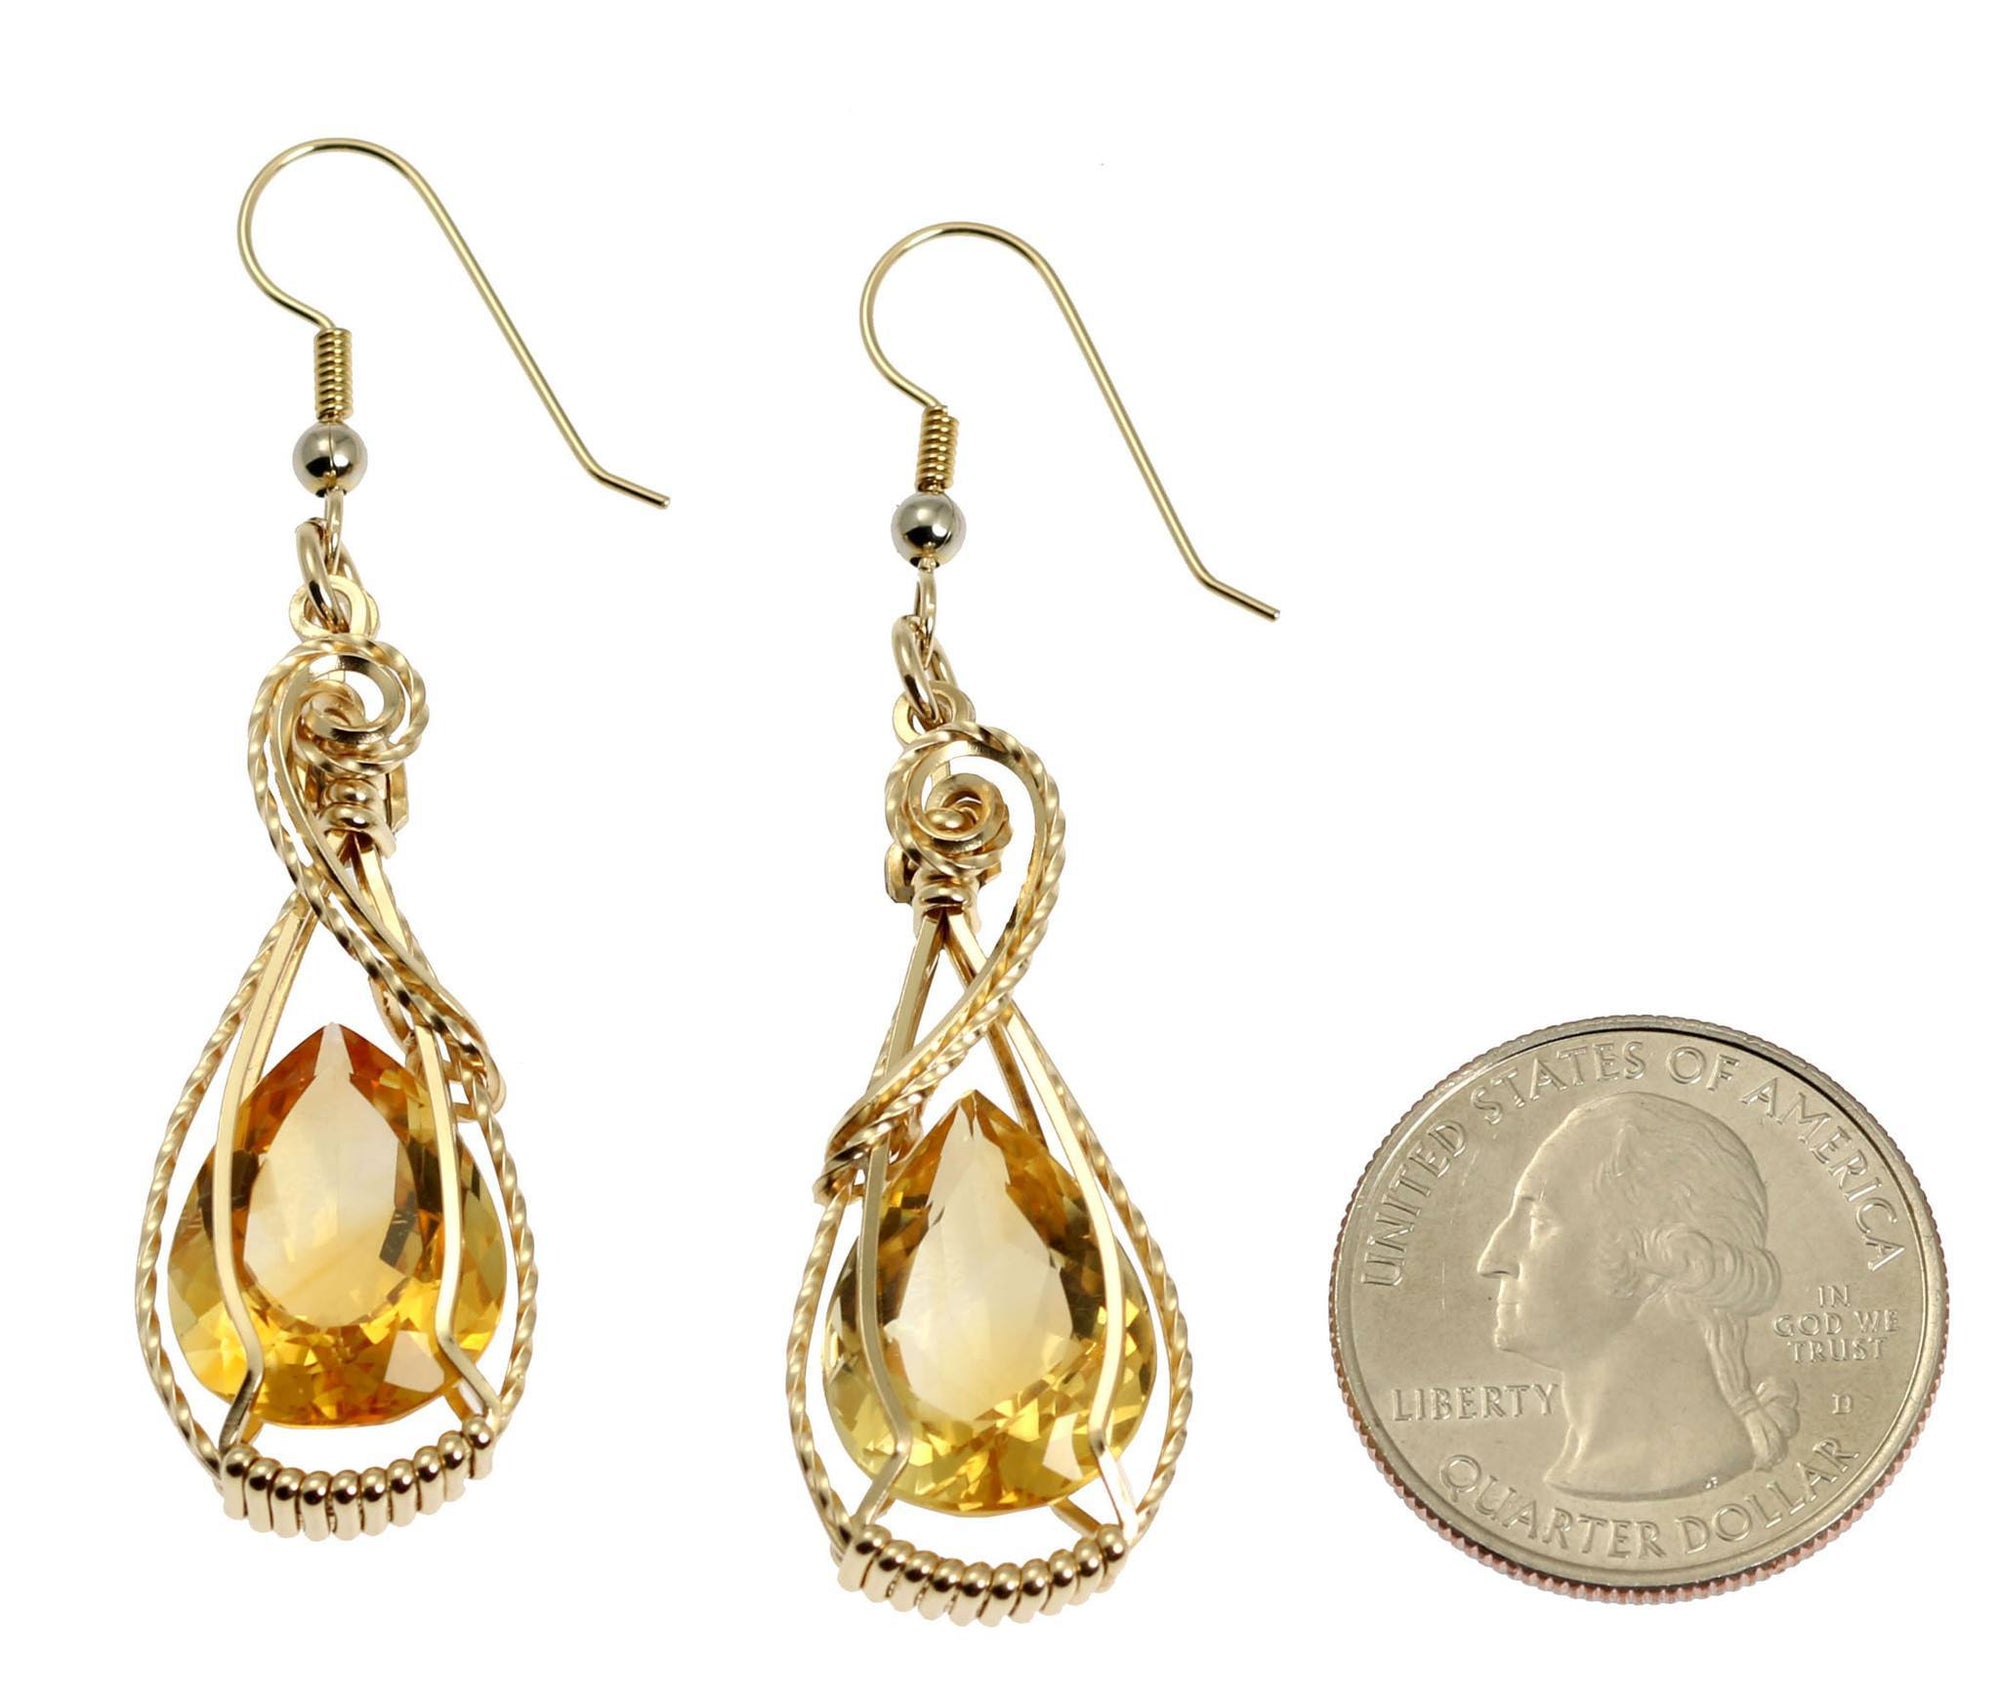 Size of 19 CT Cushion Cut Citrine 14K Gold-filled Earrings